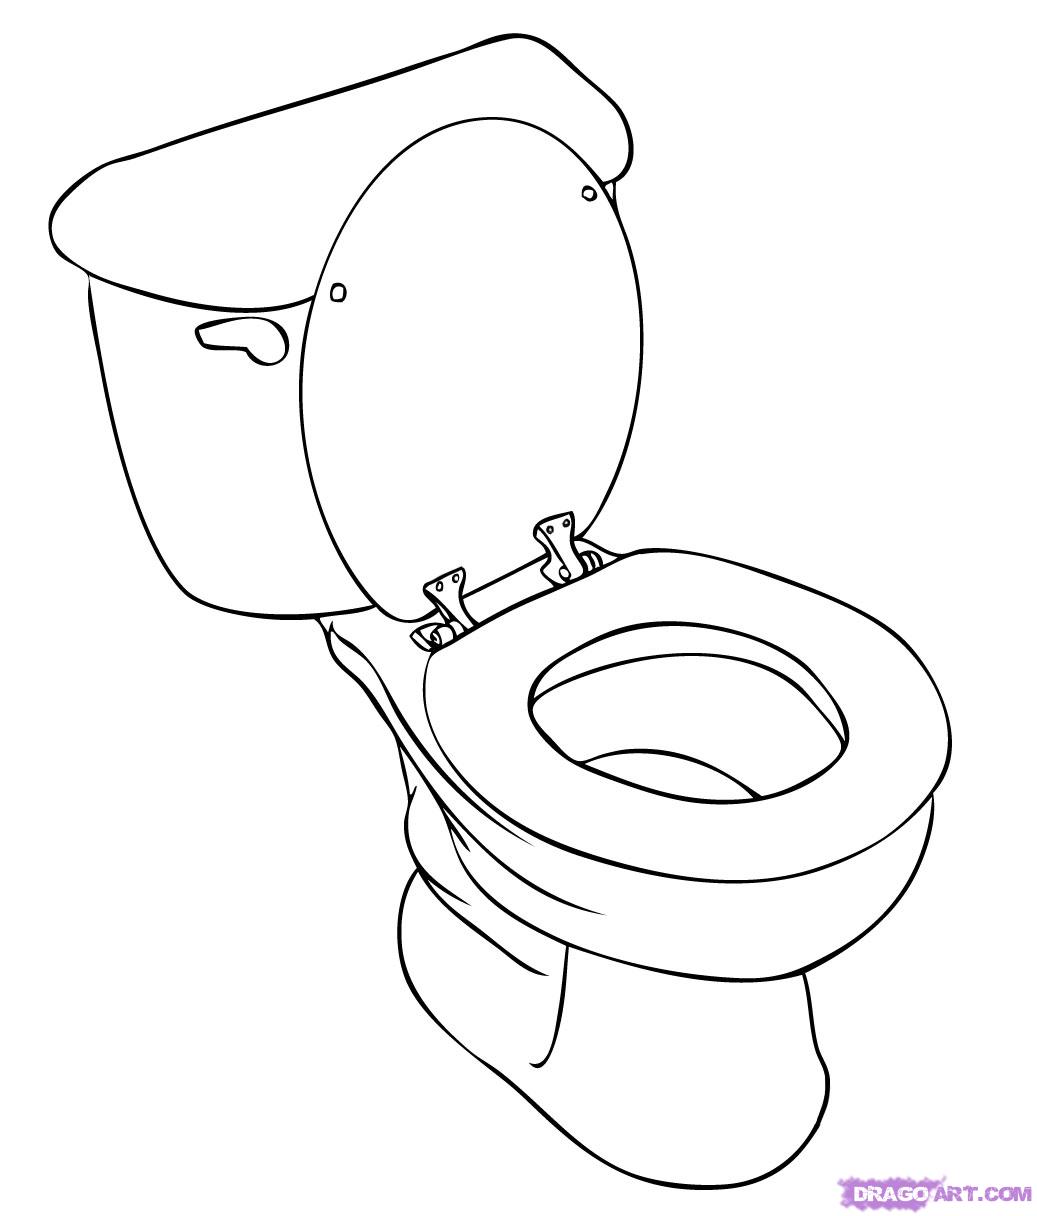 clipart of a toilet - photo #34